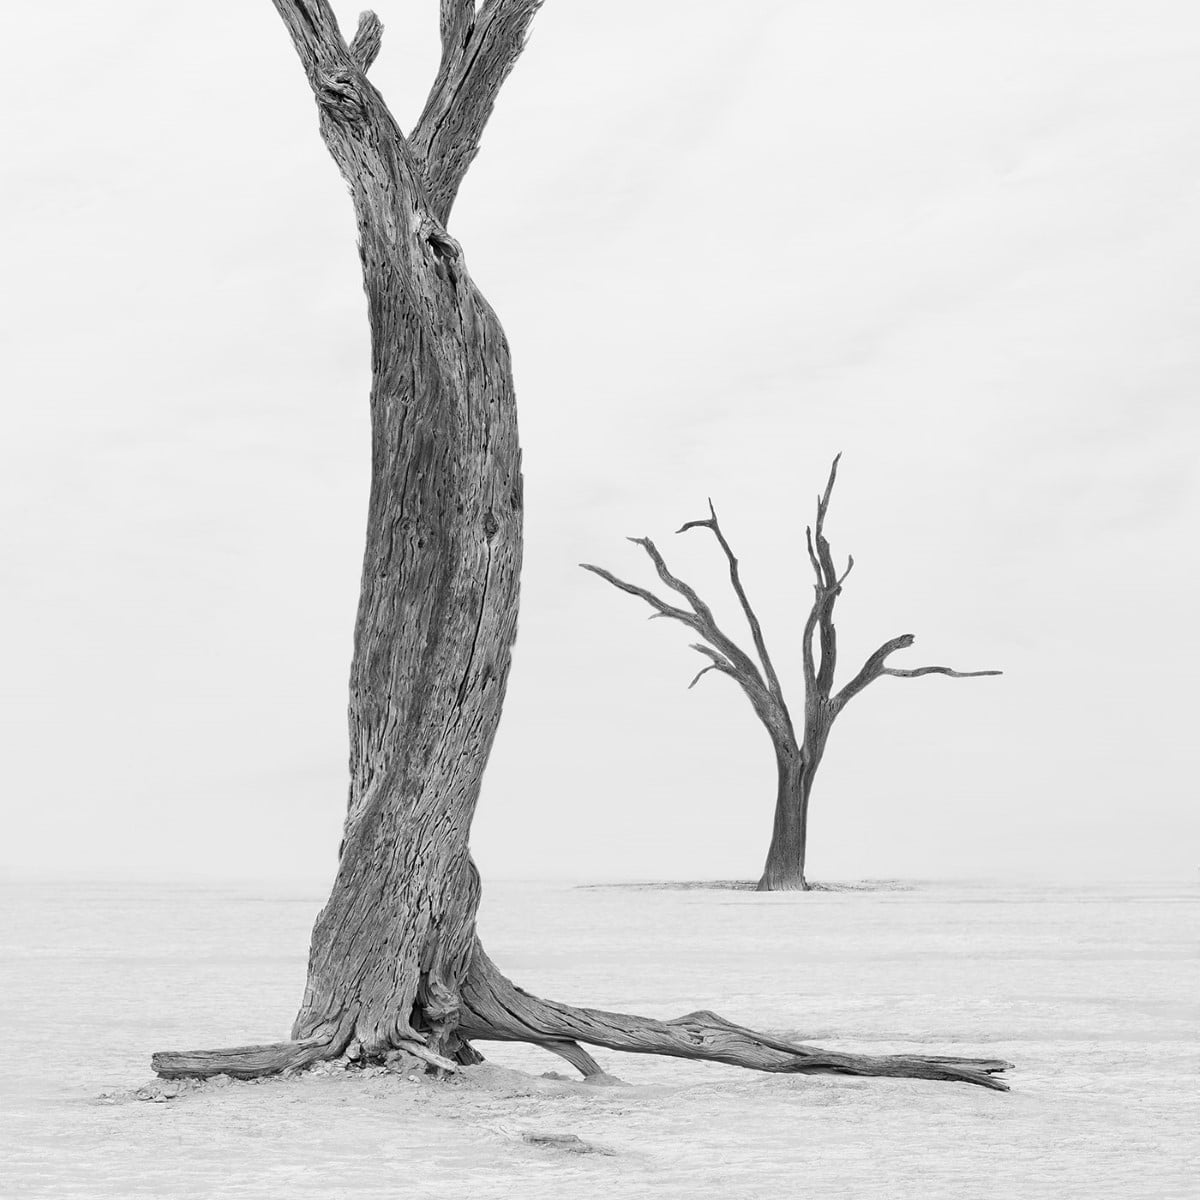 A non-conventional view of the dried trees in Deadvlei, Namibia